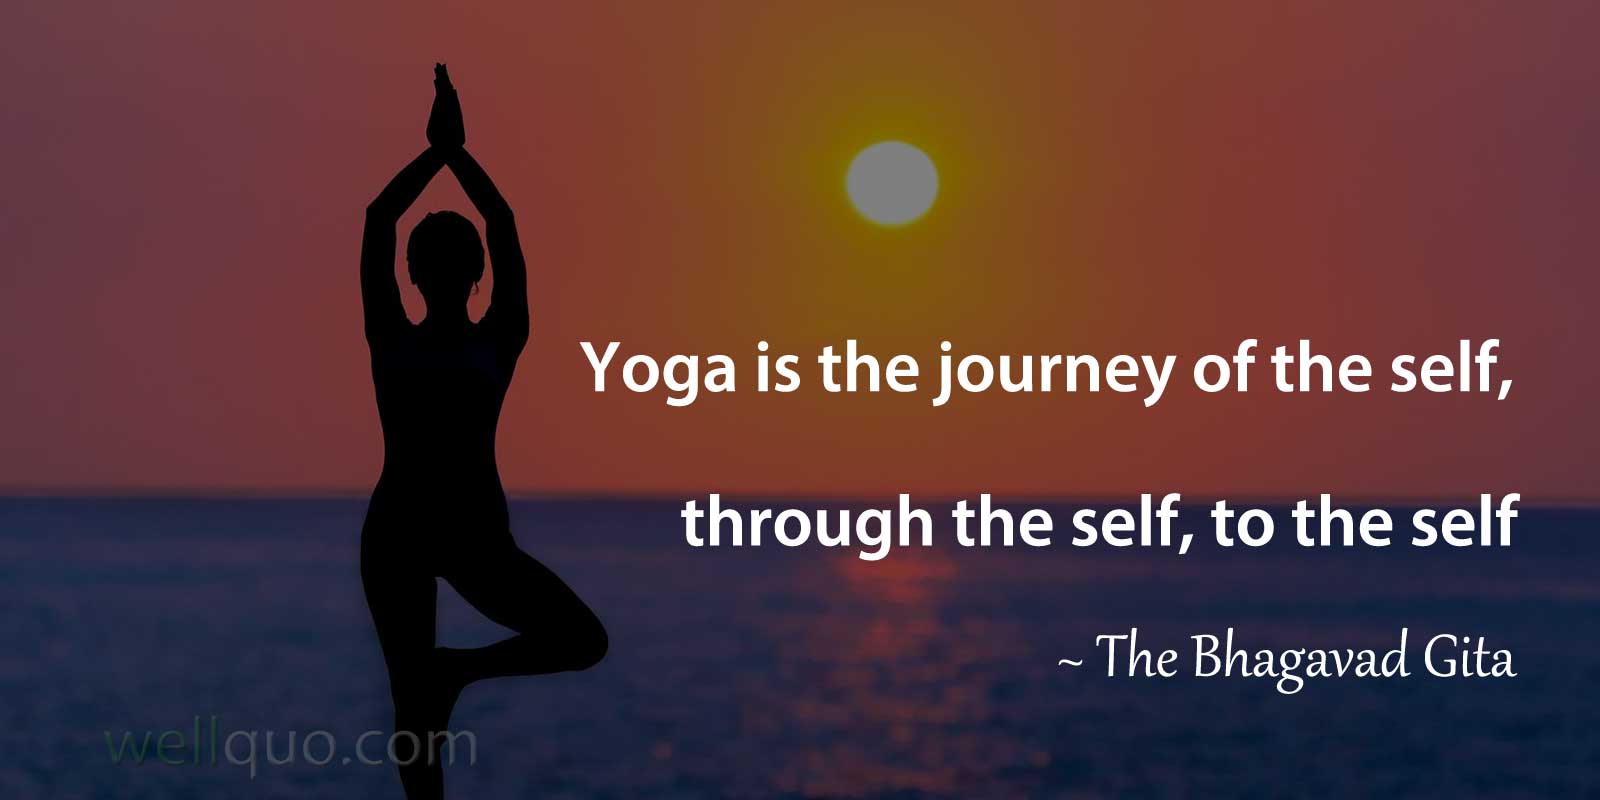 Positive Yoga Day Quotes About